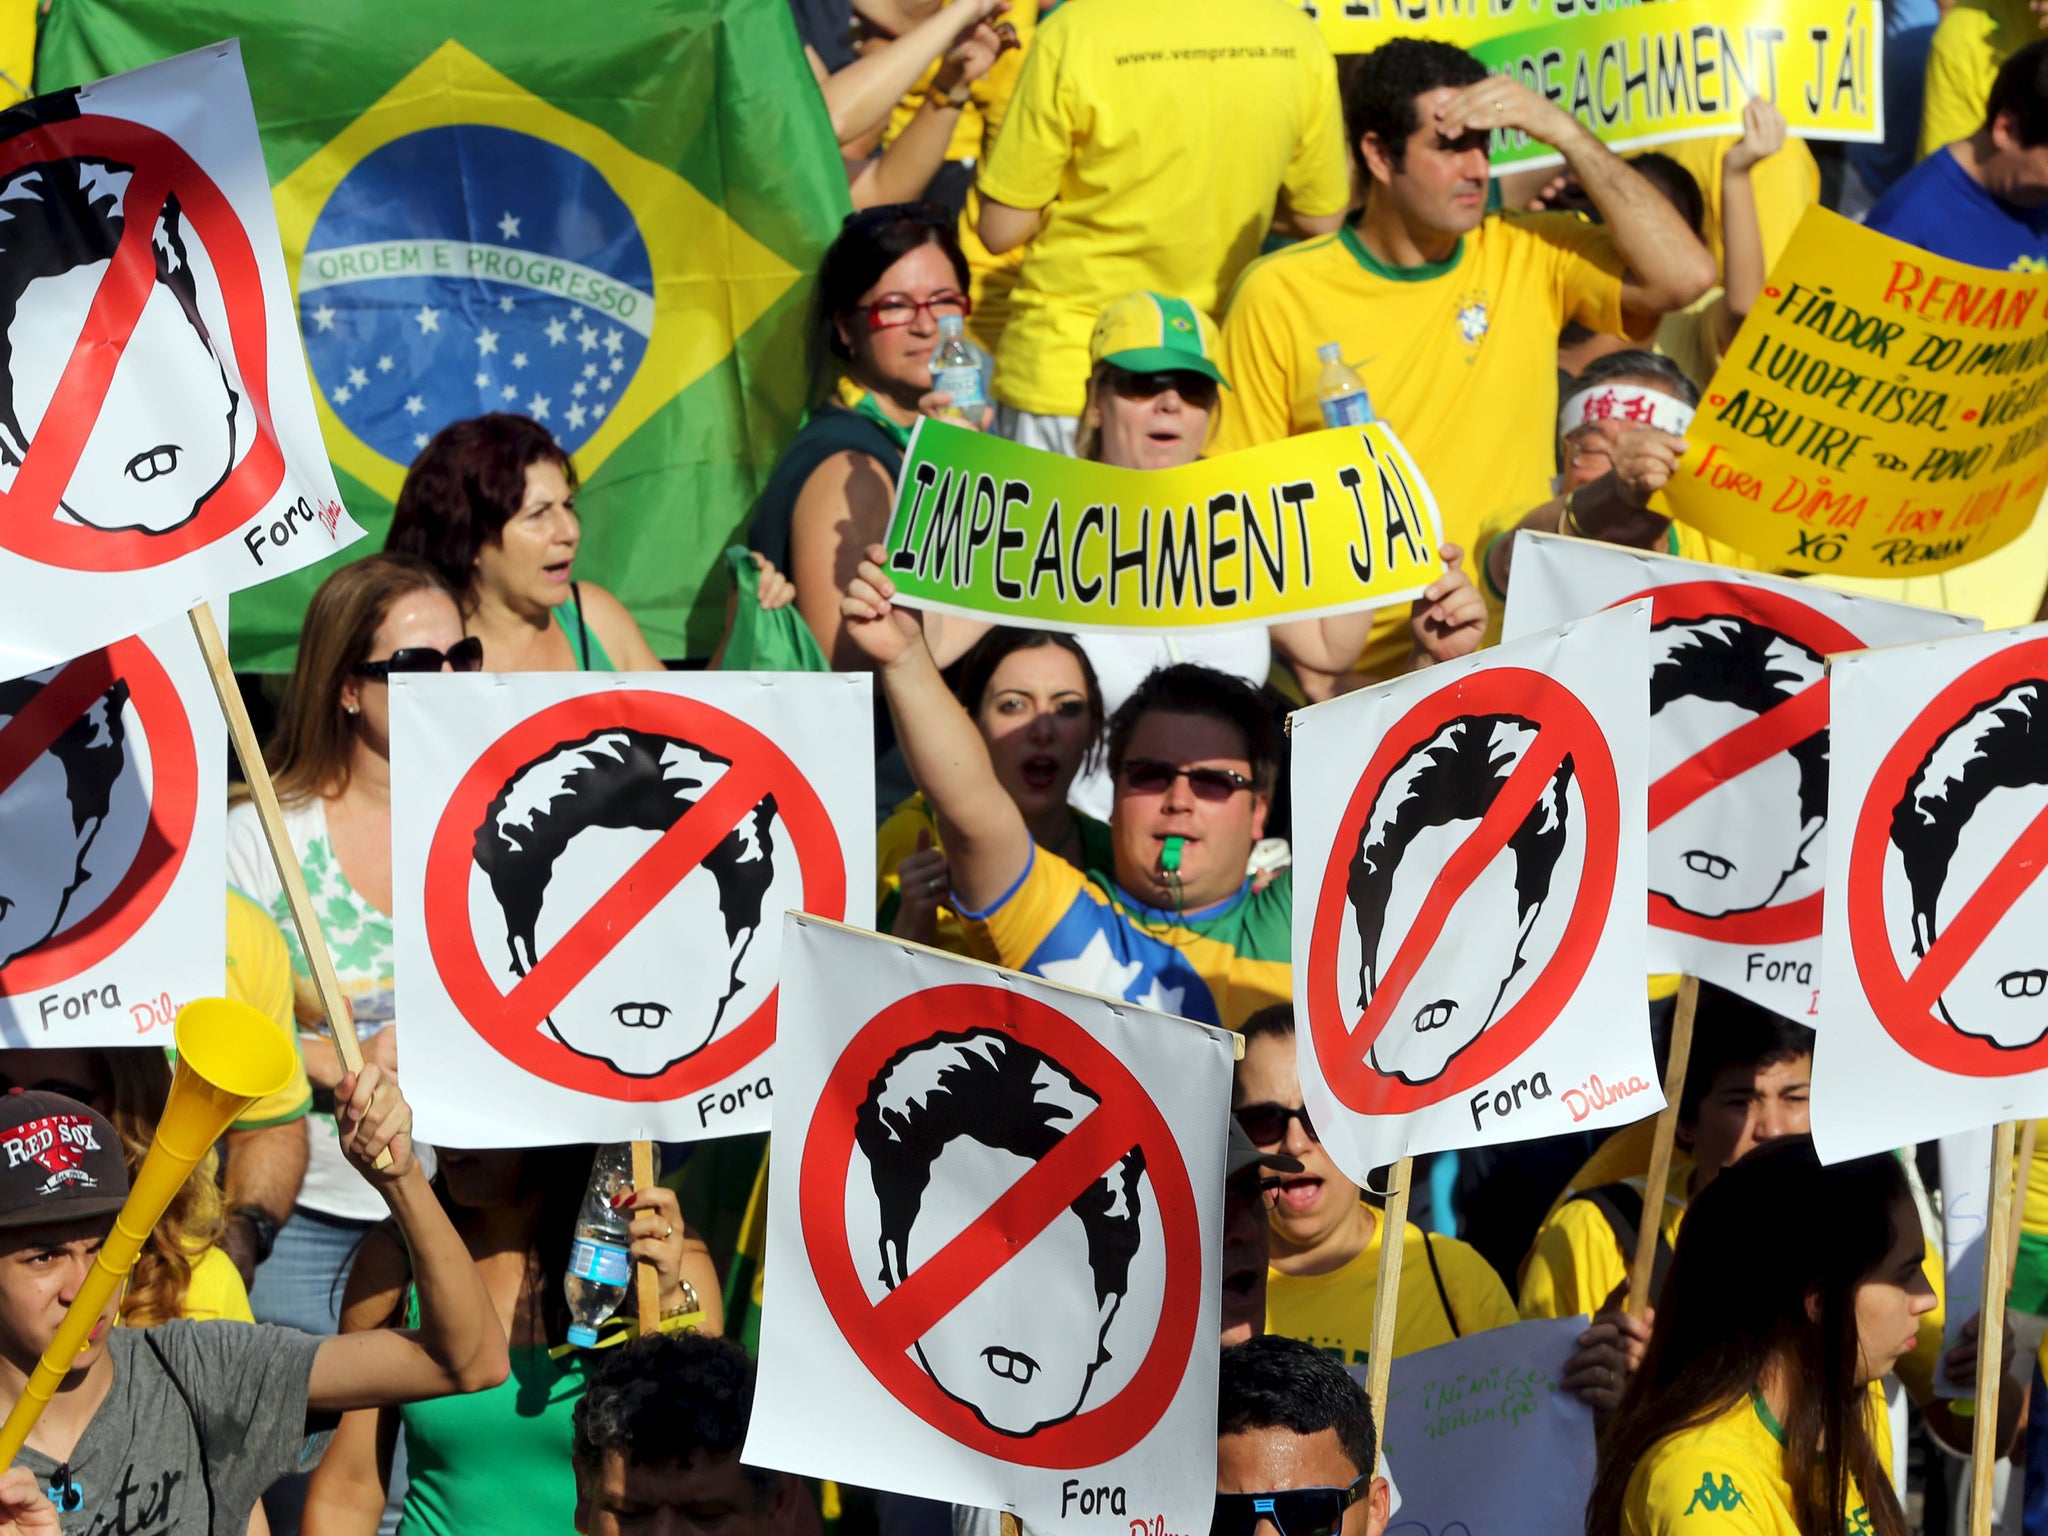 Demonstrators in Sao Paulo attend a protest against Brazil's President Dilma Rousseff, part of nationwide protests calling for her impeachment